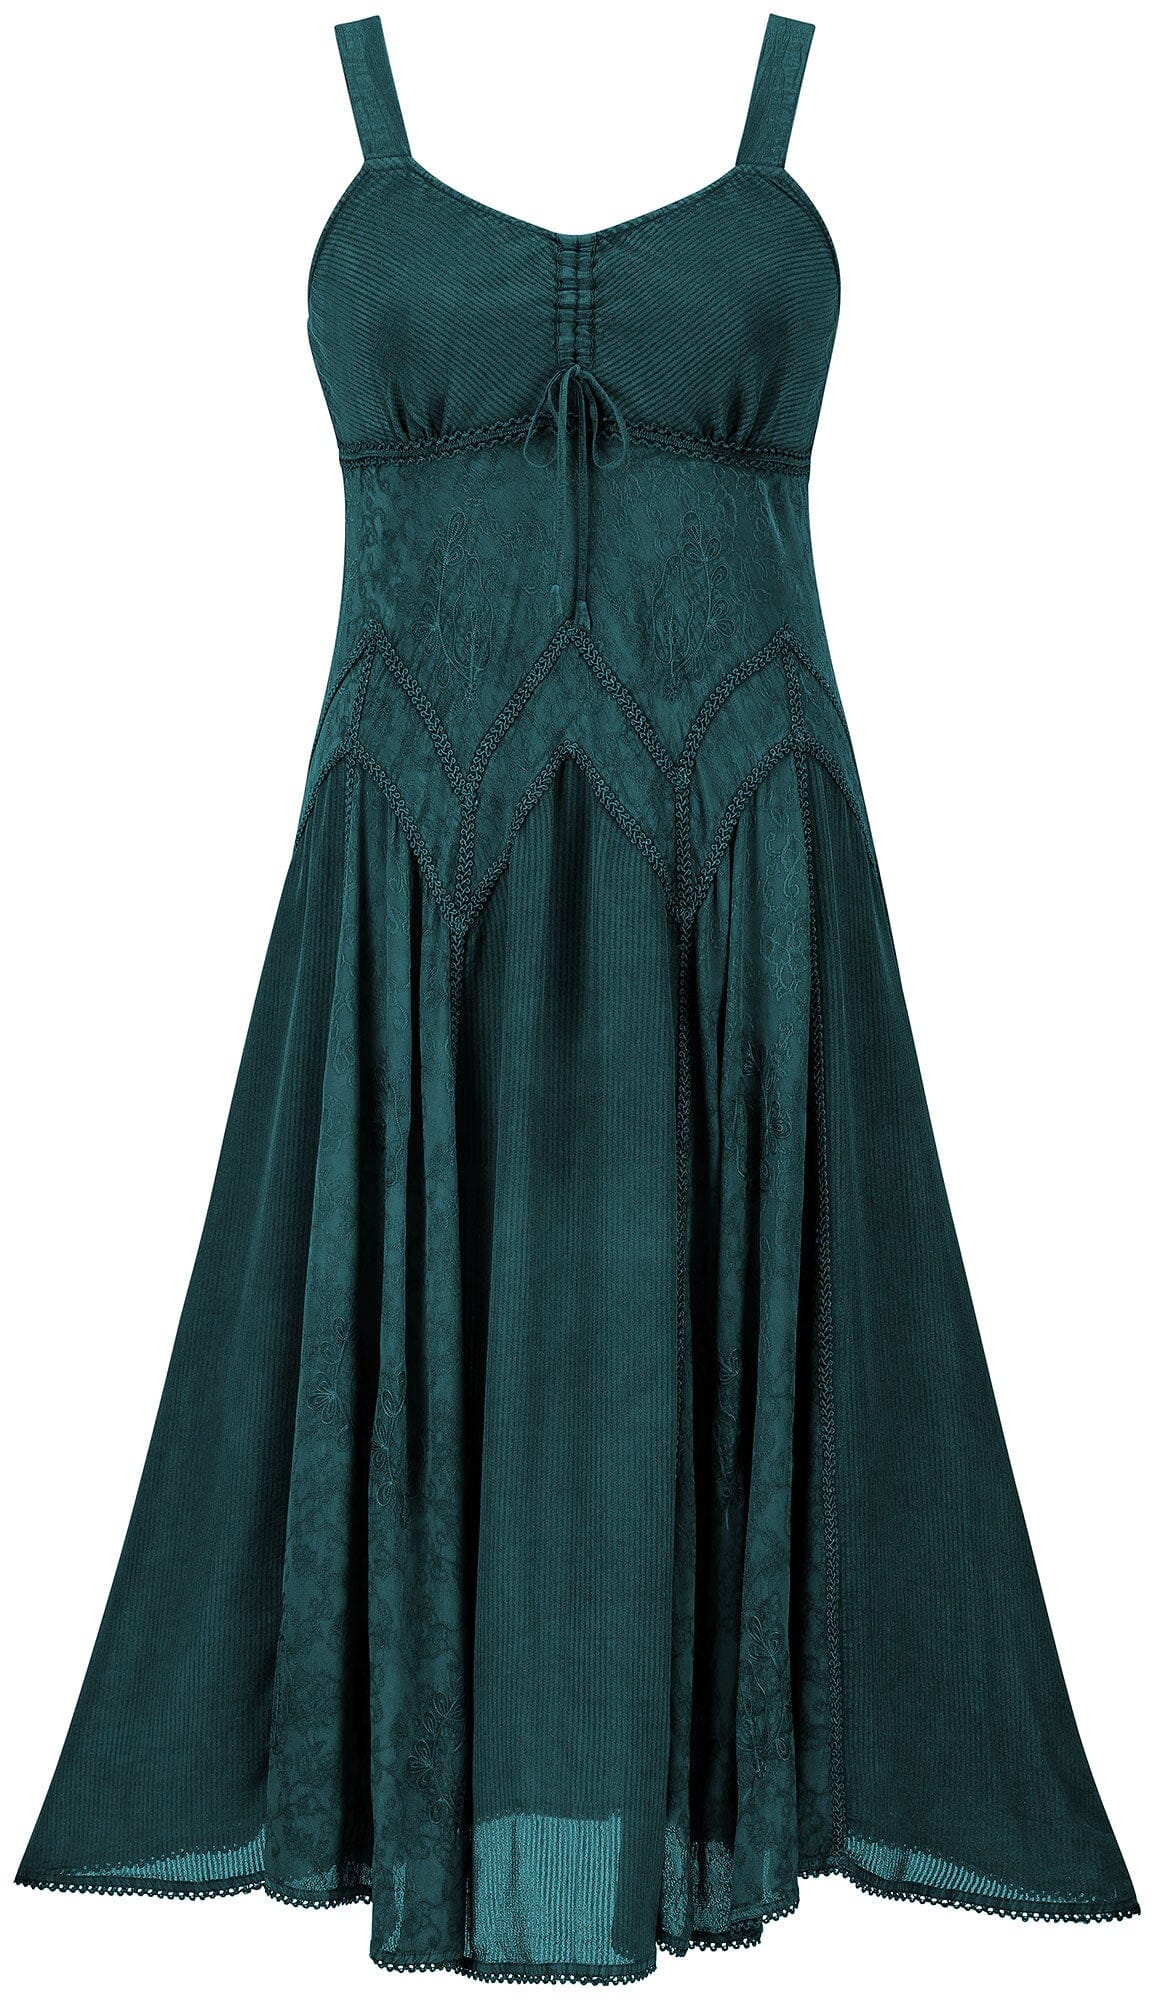 Delilah Maxi Limited Edition